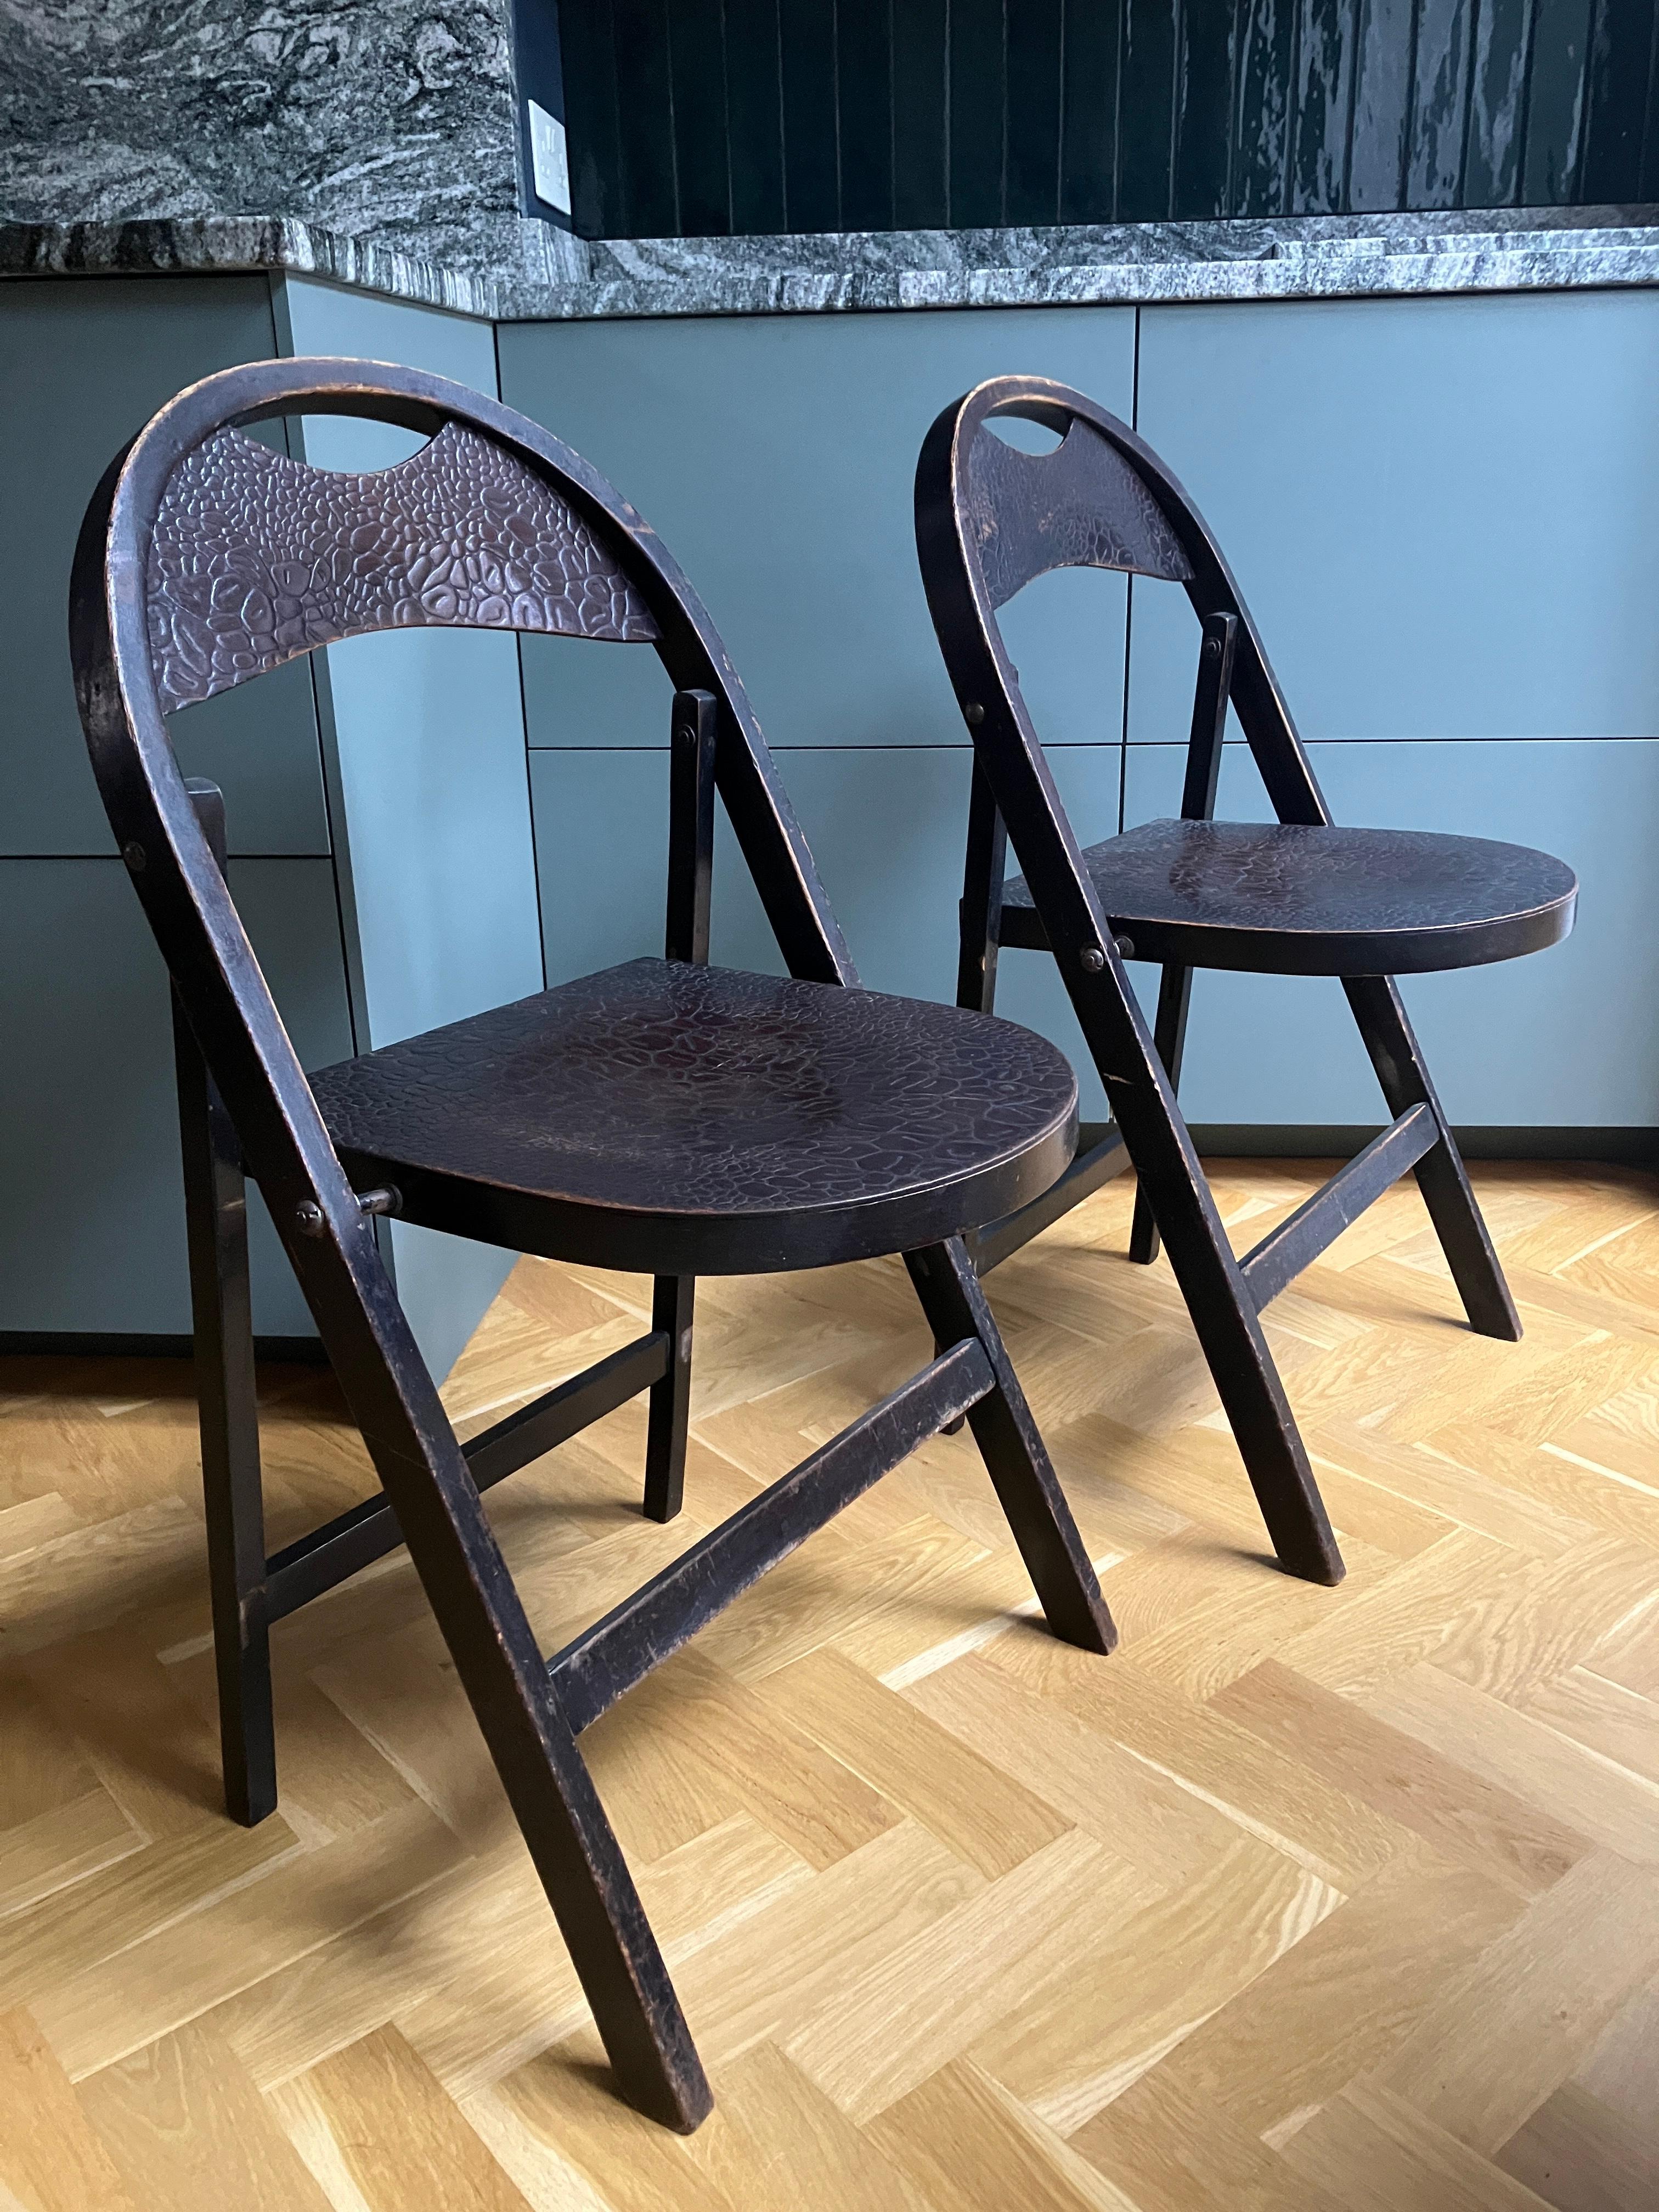 A pair of Bauhaus bentwood crocodile chairs by Thonet. Beech and plywood folding café chairs from the 1930s with crocodile skin embossed seat and back panel in great condition. The embossed pattern was created by running the wood through huge cold